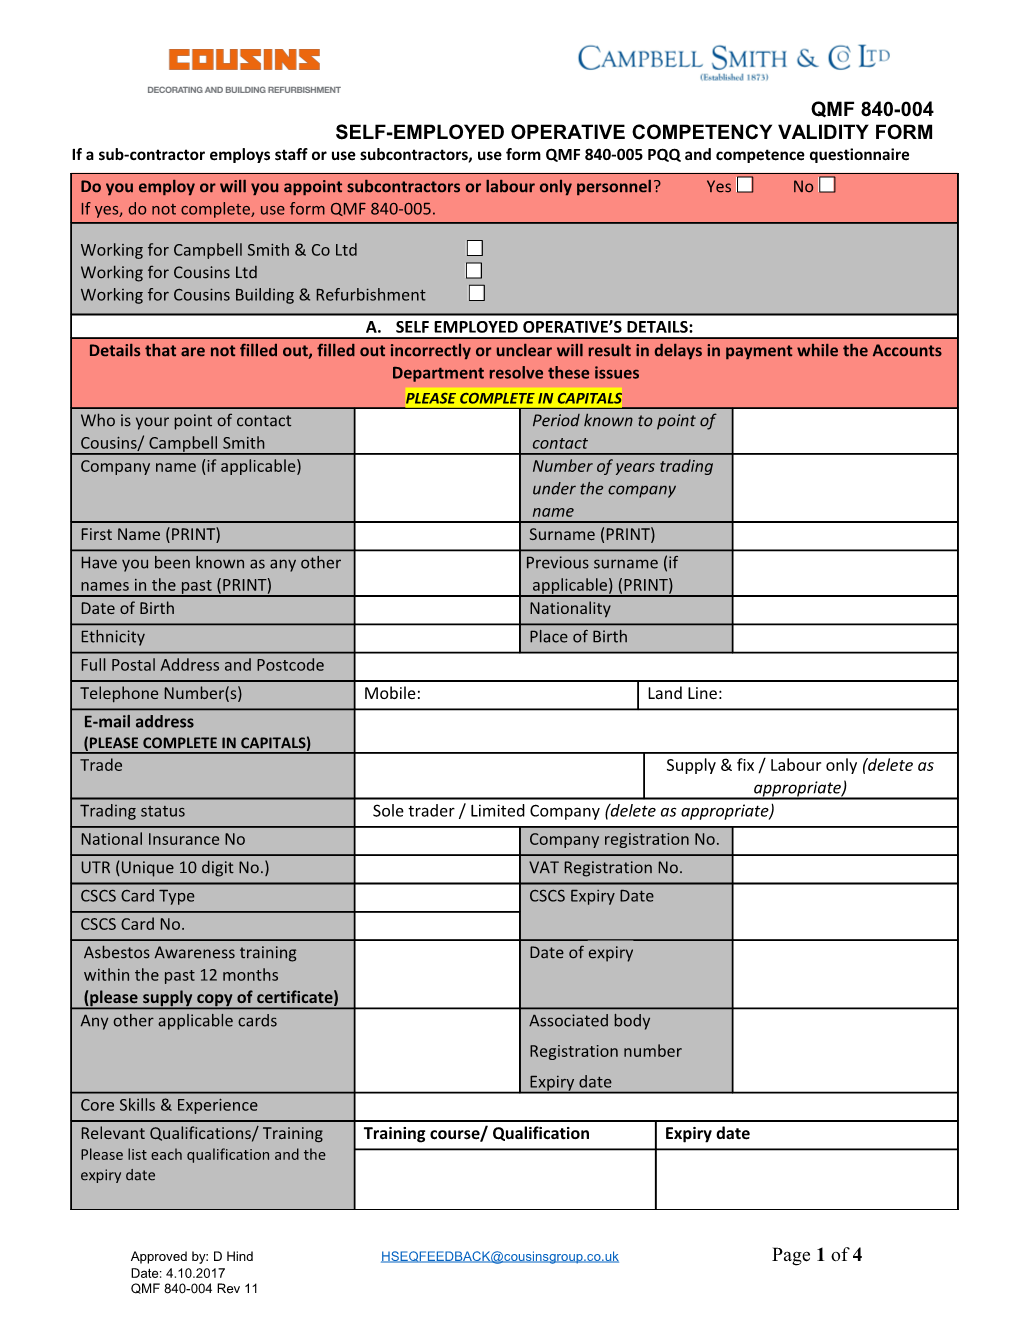 Self-Employed Operative Competency Validity Form